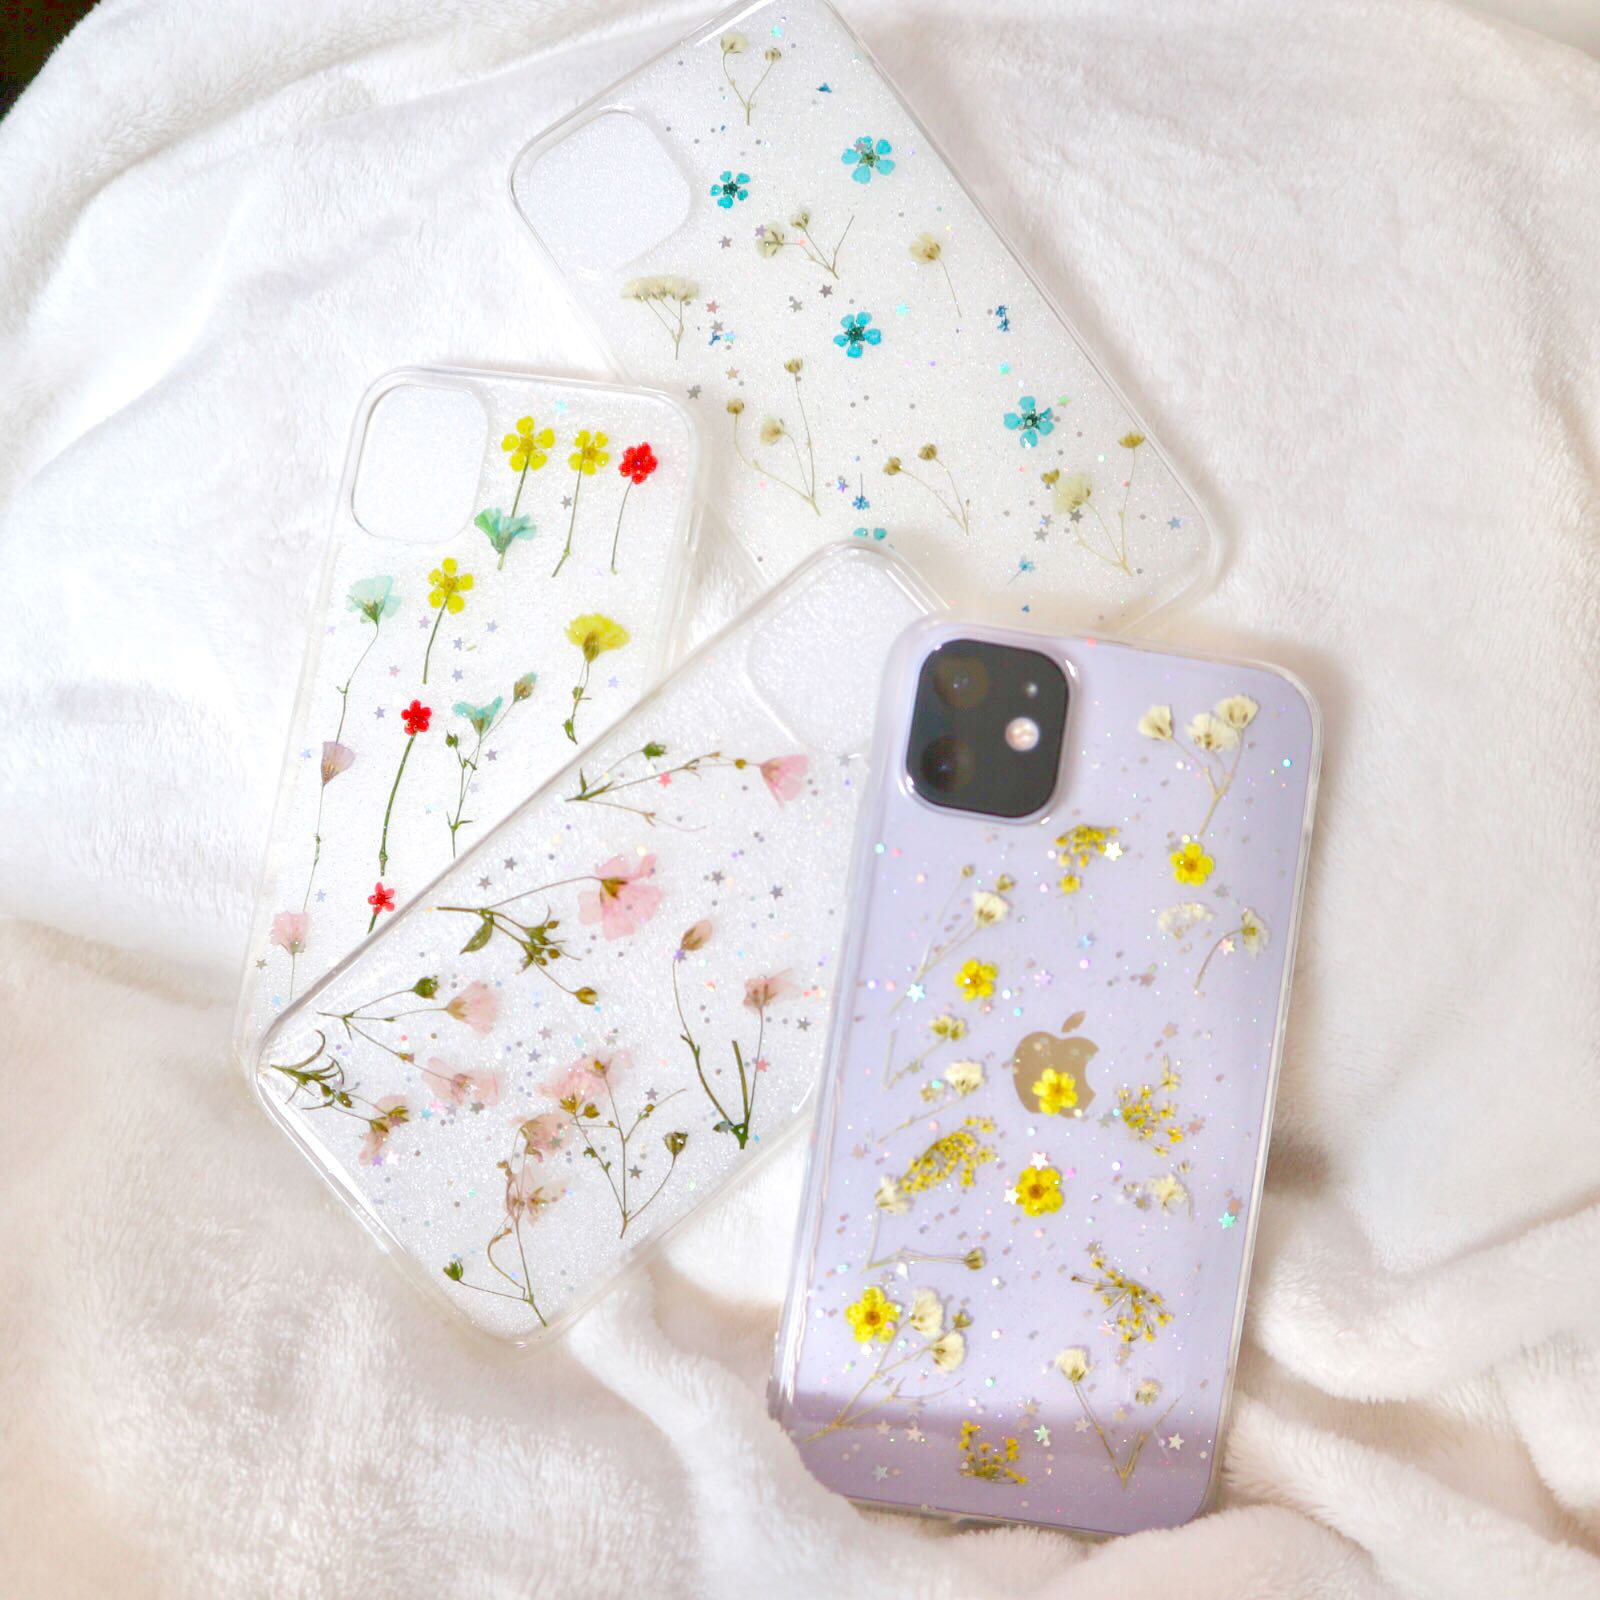 Dried flower iphone 11 case